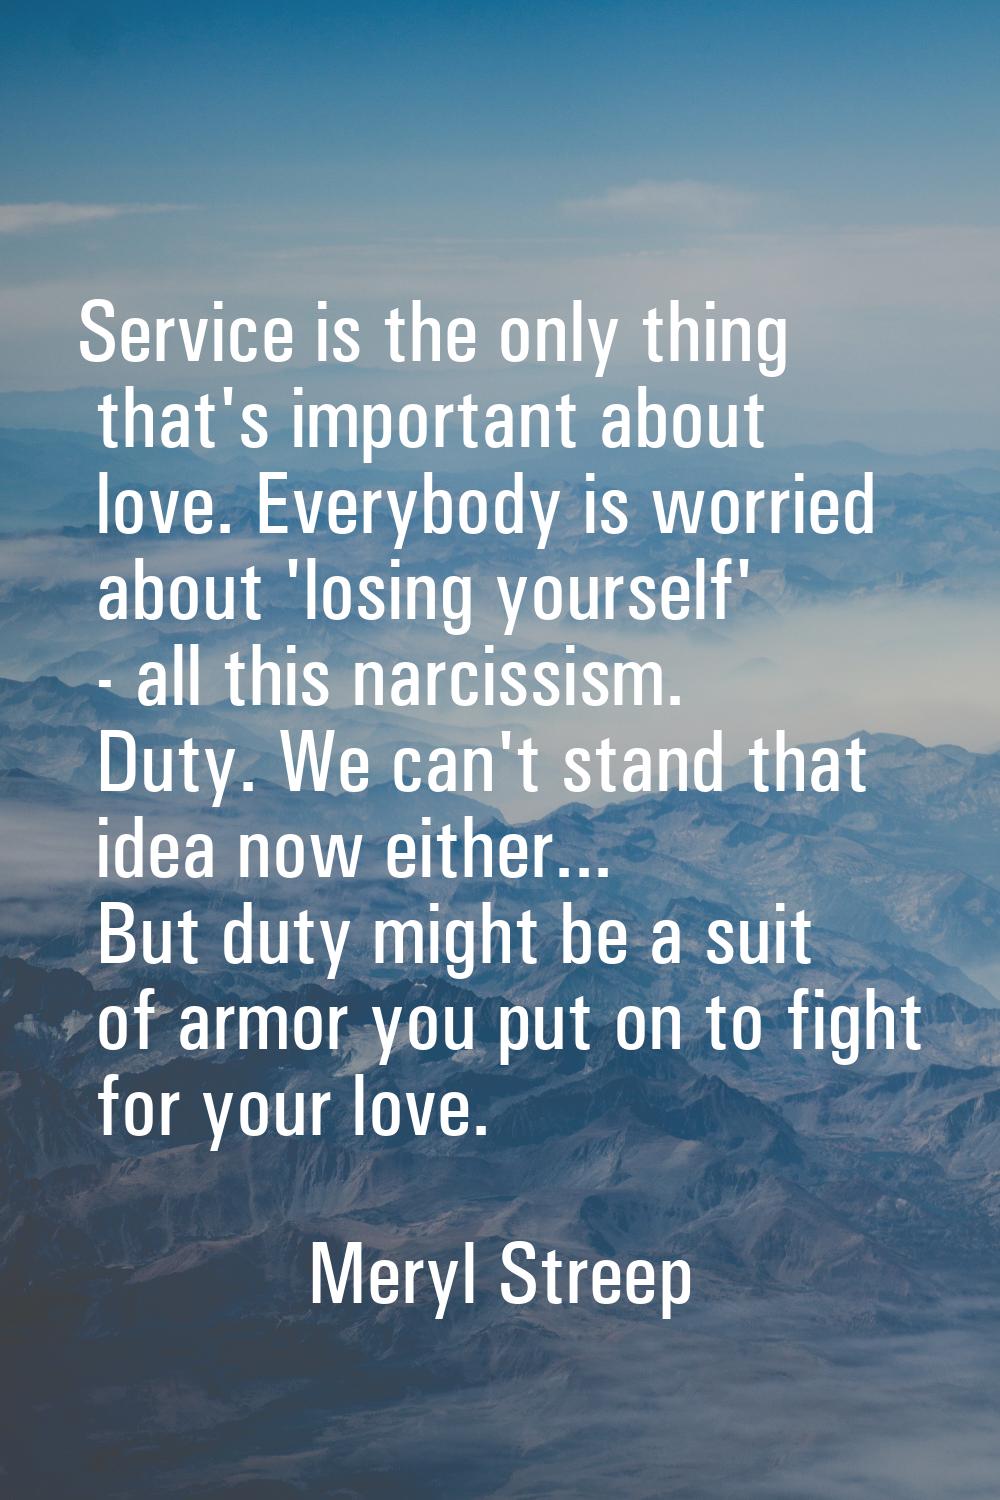 Service is the only thing that's important about love. Everybody is worried about 'losing yourself'